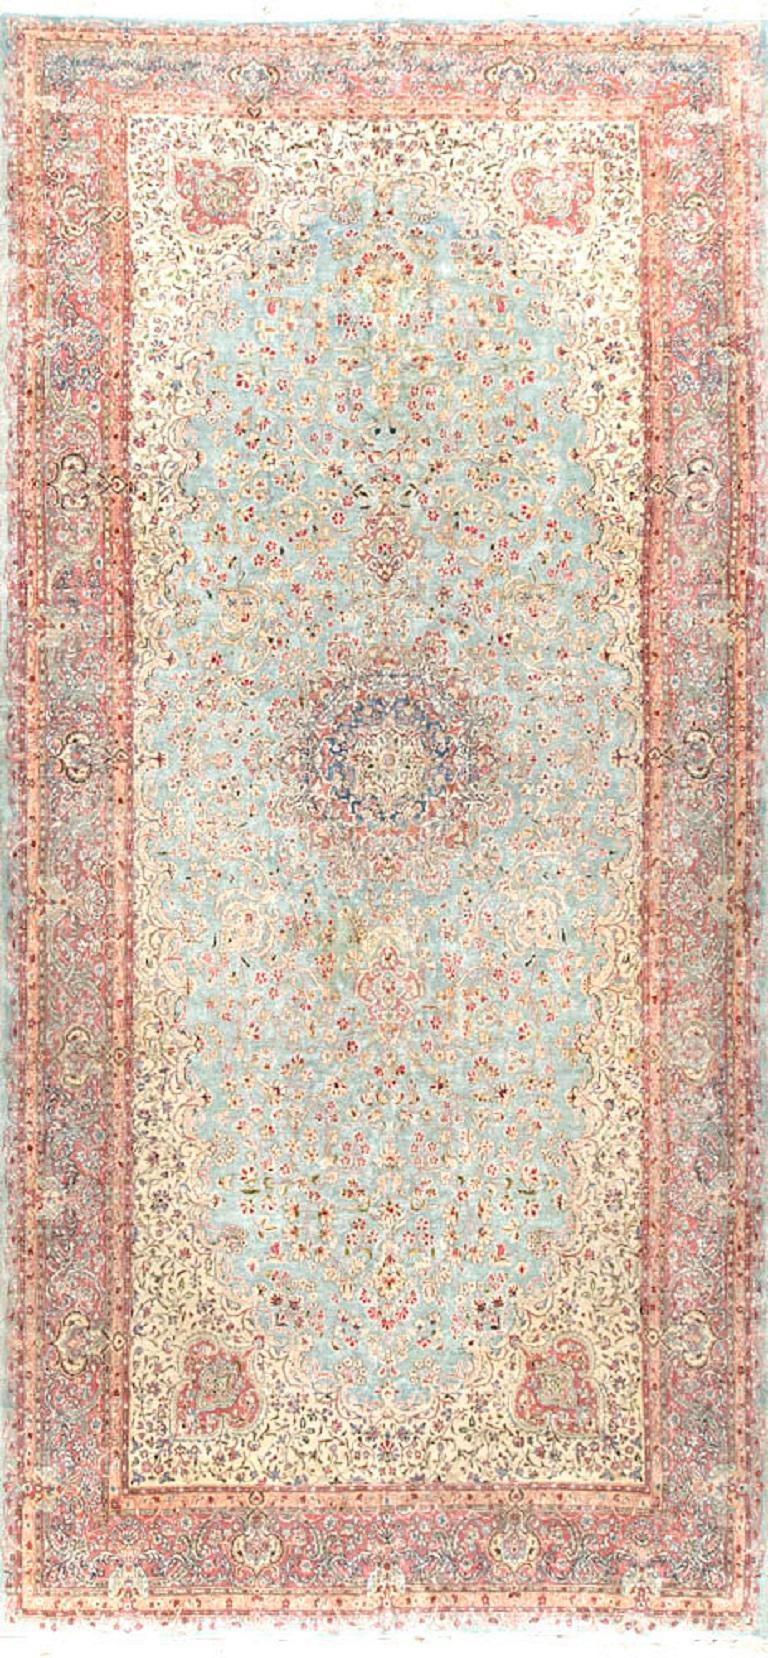 Antique Oversize Persian Kirman Rug, circa 1890 8'3 x 18'2 In Good Condition For Sale In Secaucus, NJ